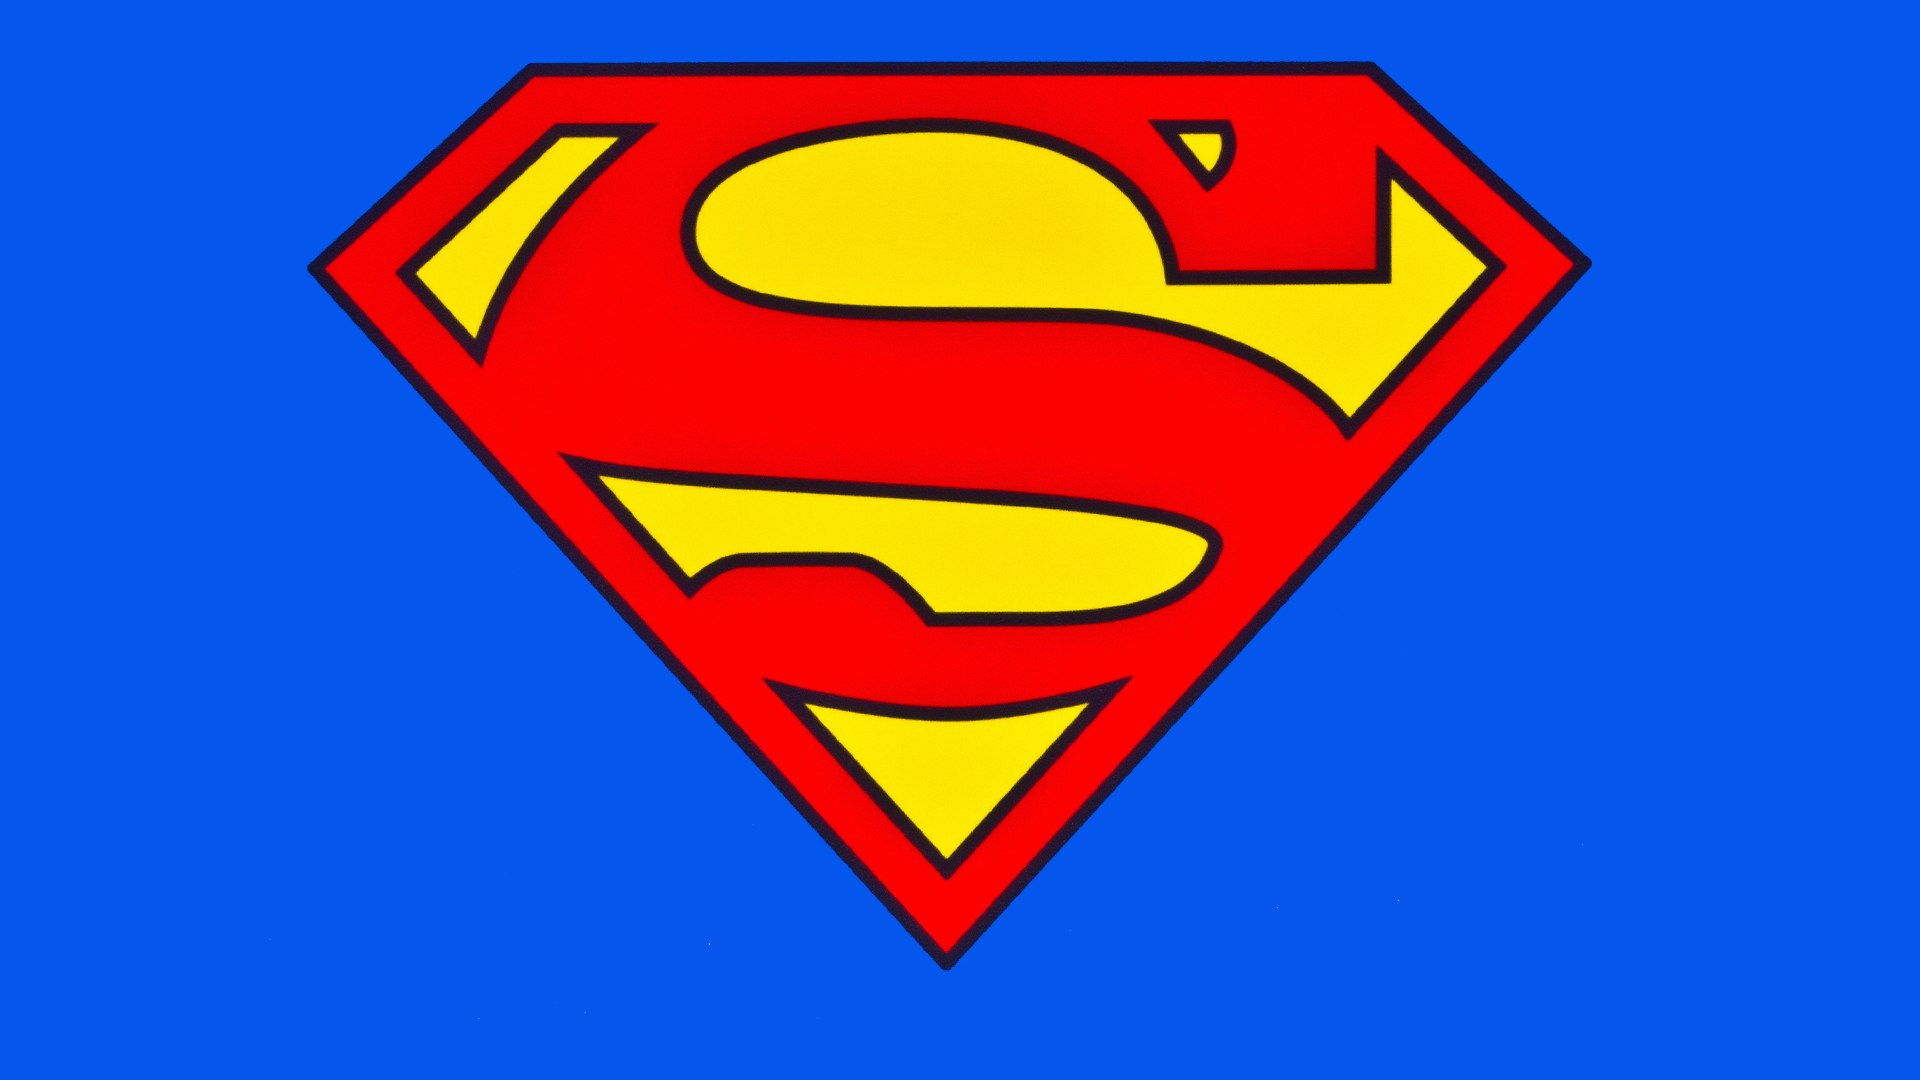 A stock image of a Superman logo on a blue background